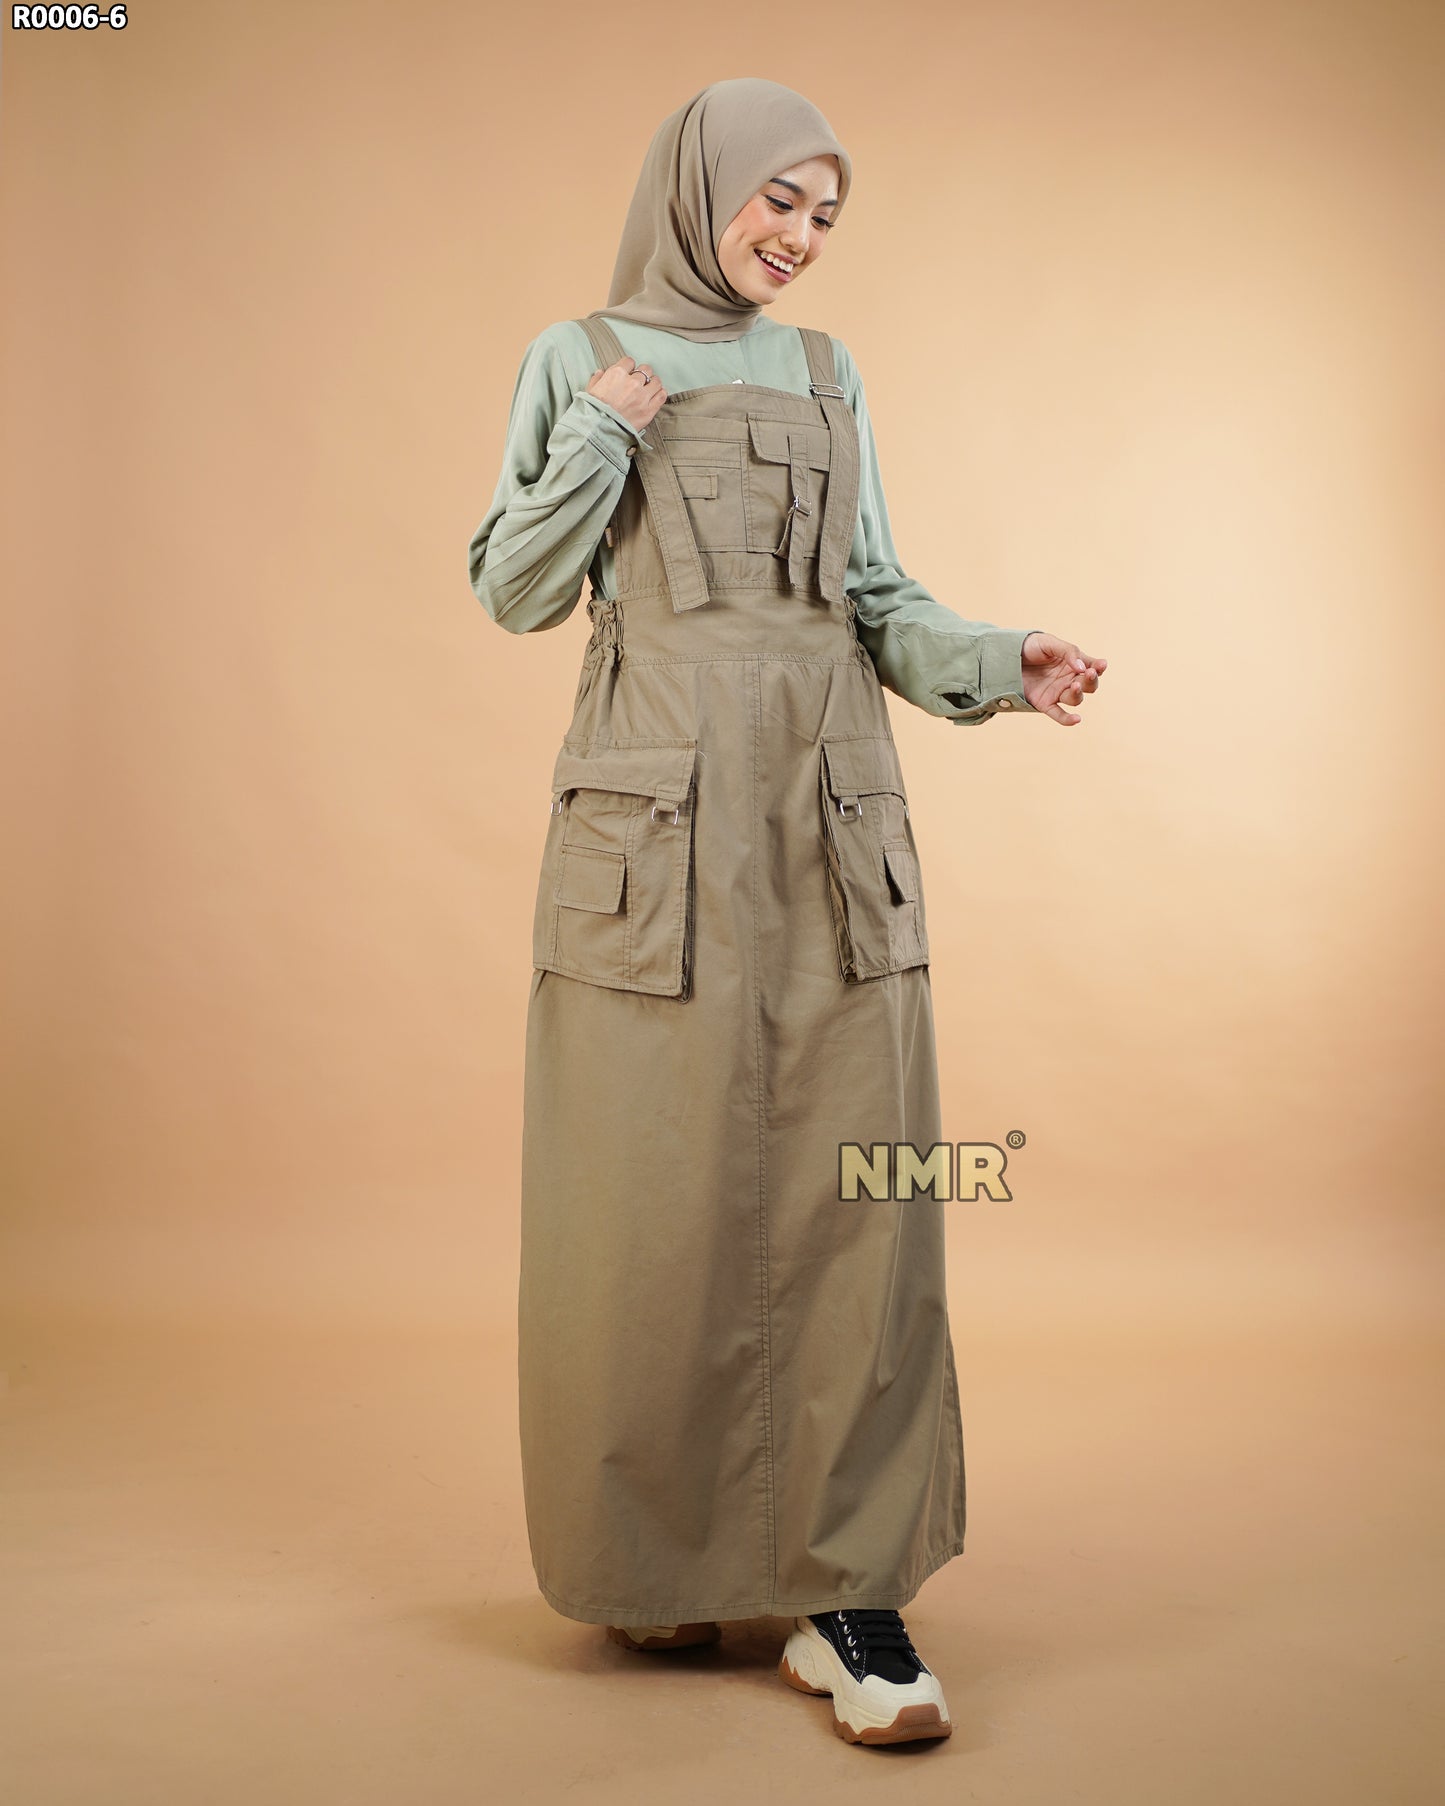 NMR Gamis Jumpsuit Overall Baby Canvas Vol R0006-6